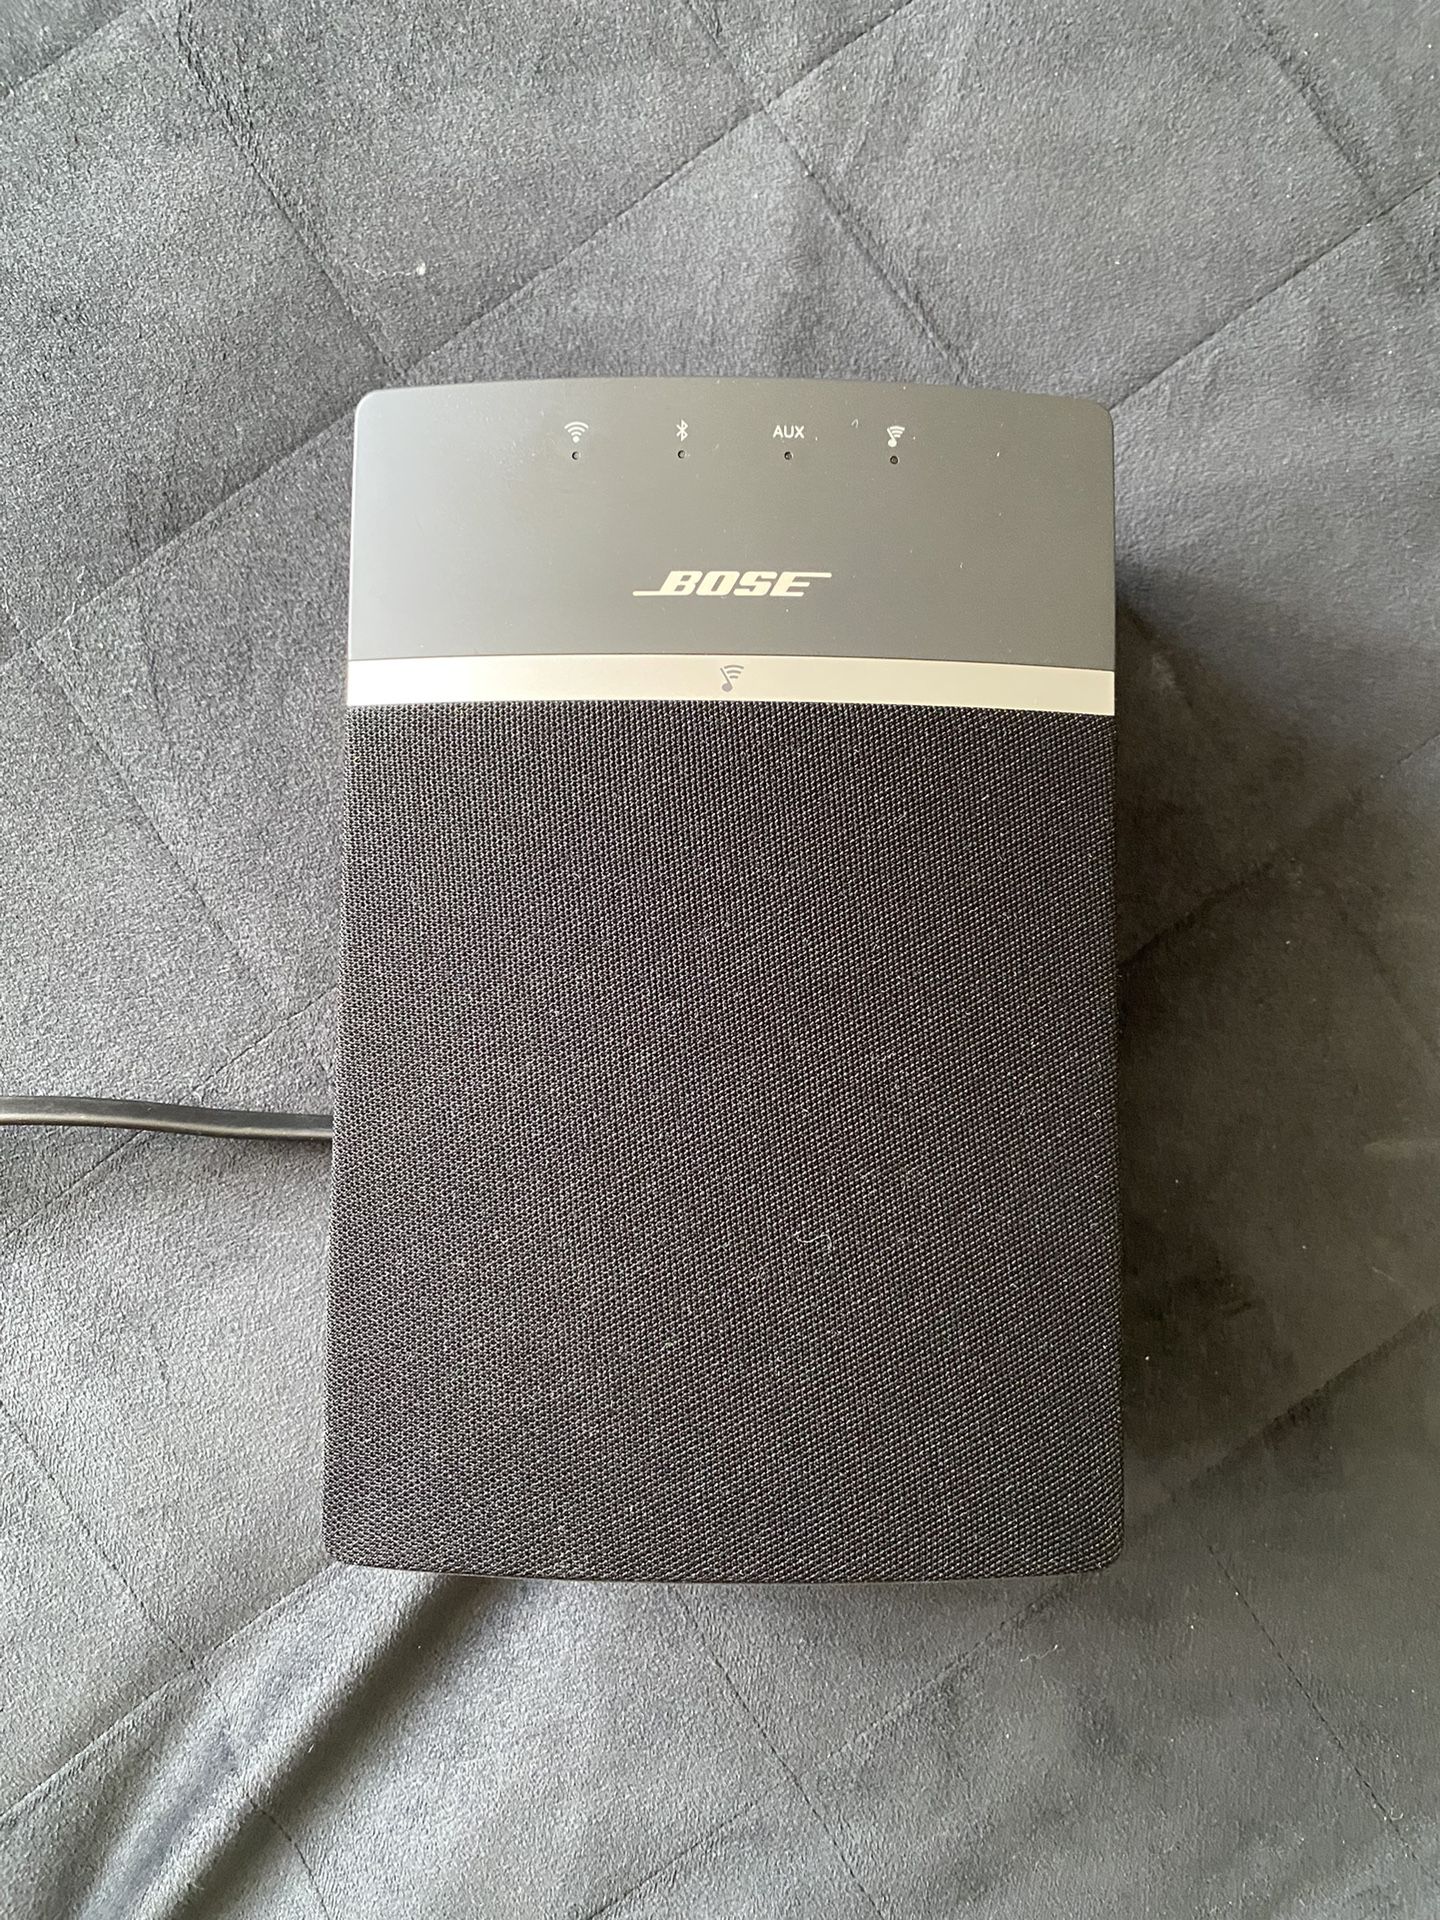 Bose SoundTouch 10 Wireless Music Speaker System Bluetooth